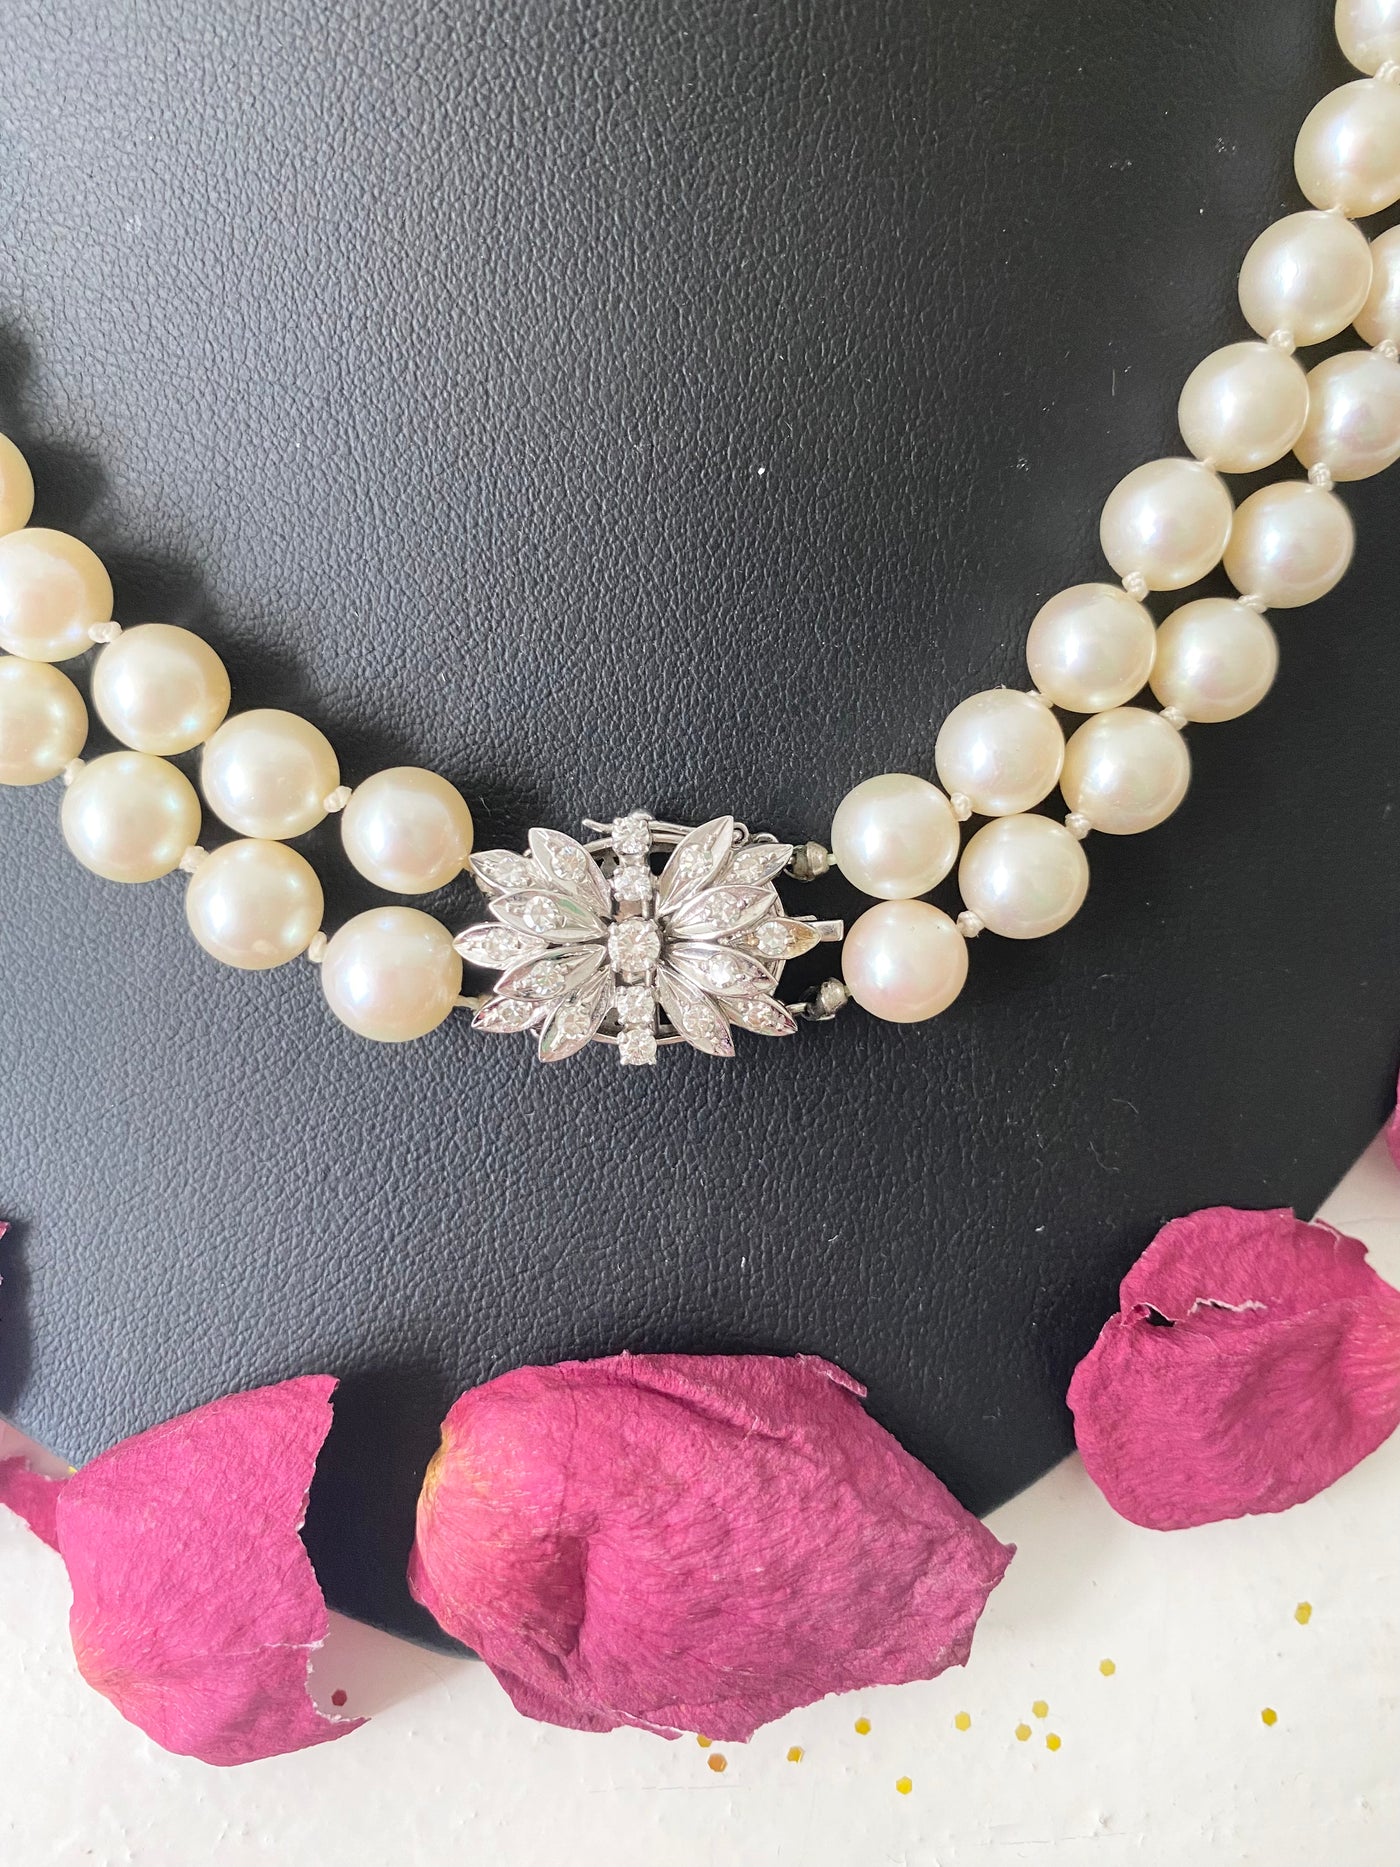 Preloved Pearl Necklace with Diamond Clasp